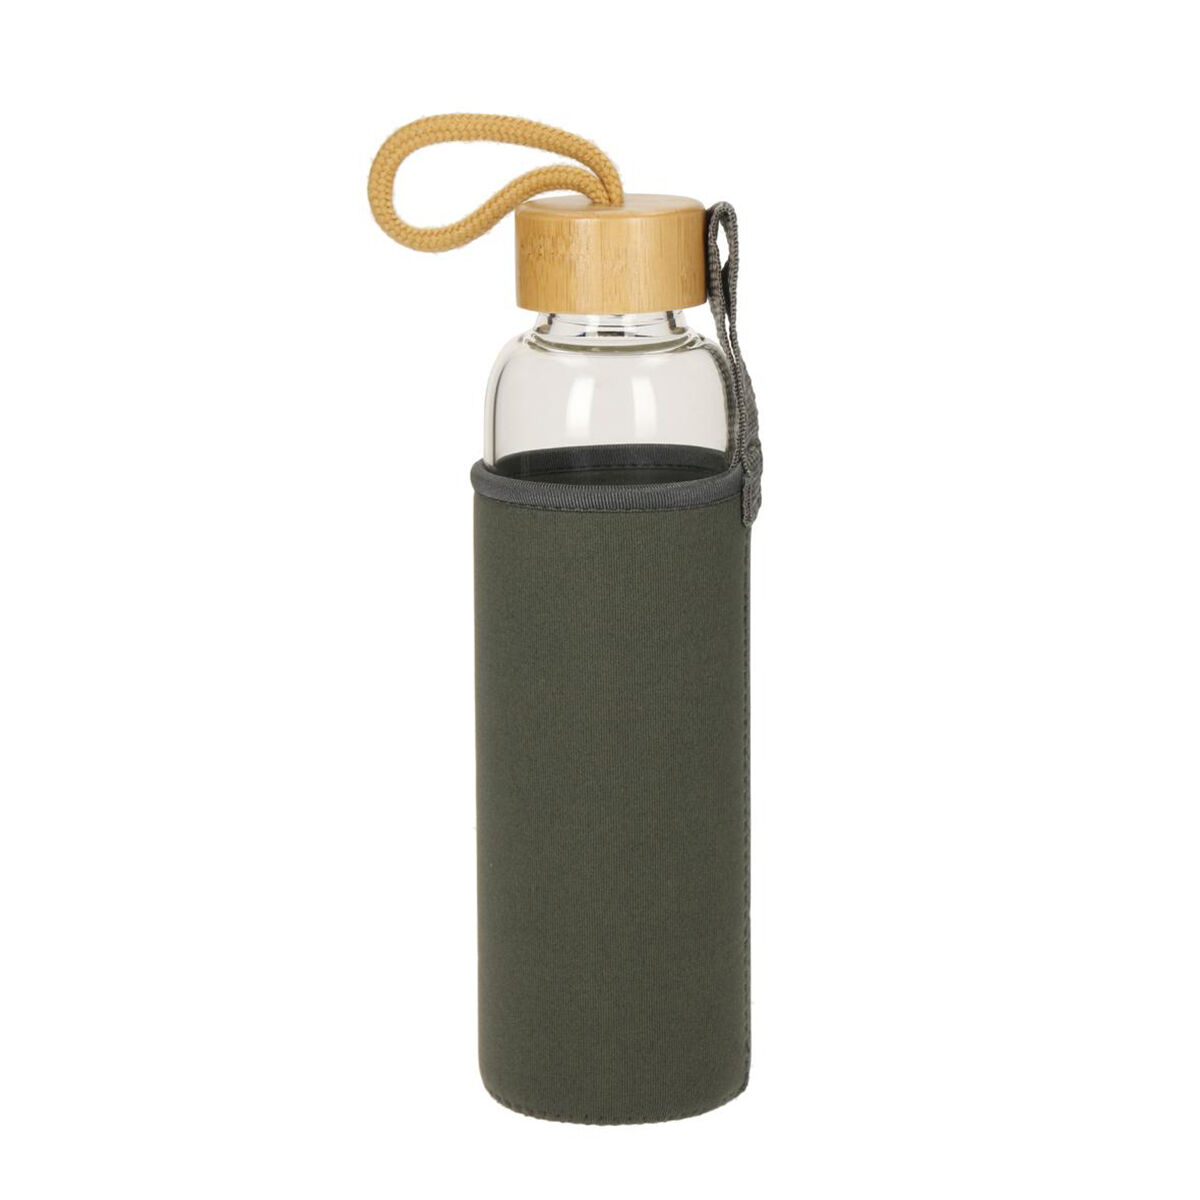 Glass bottle with bamboo lid and sleeve